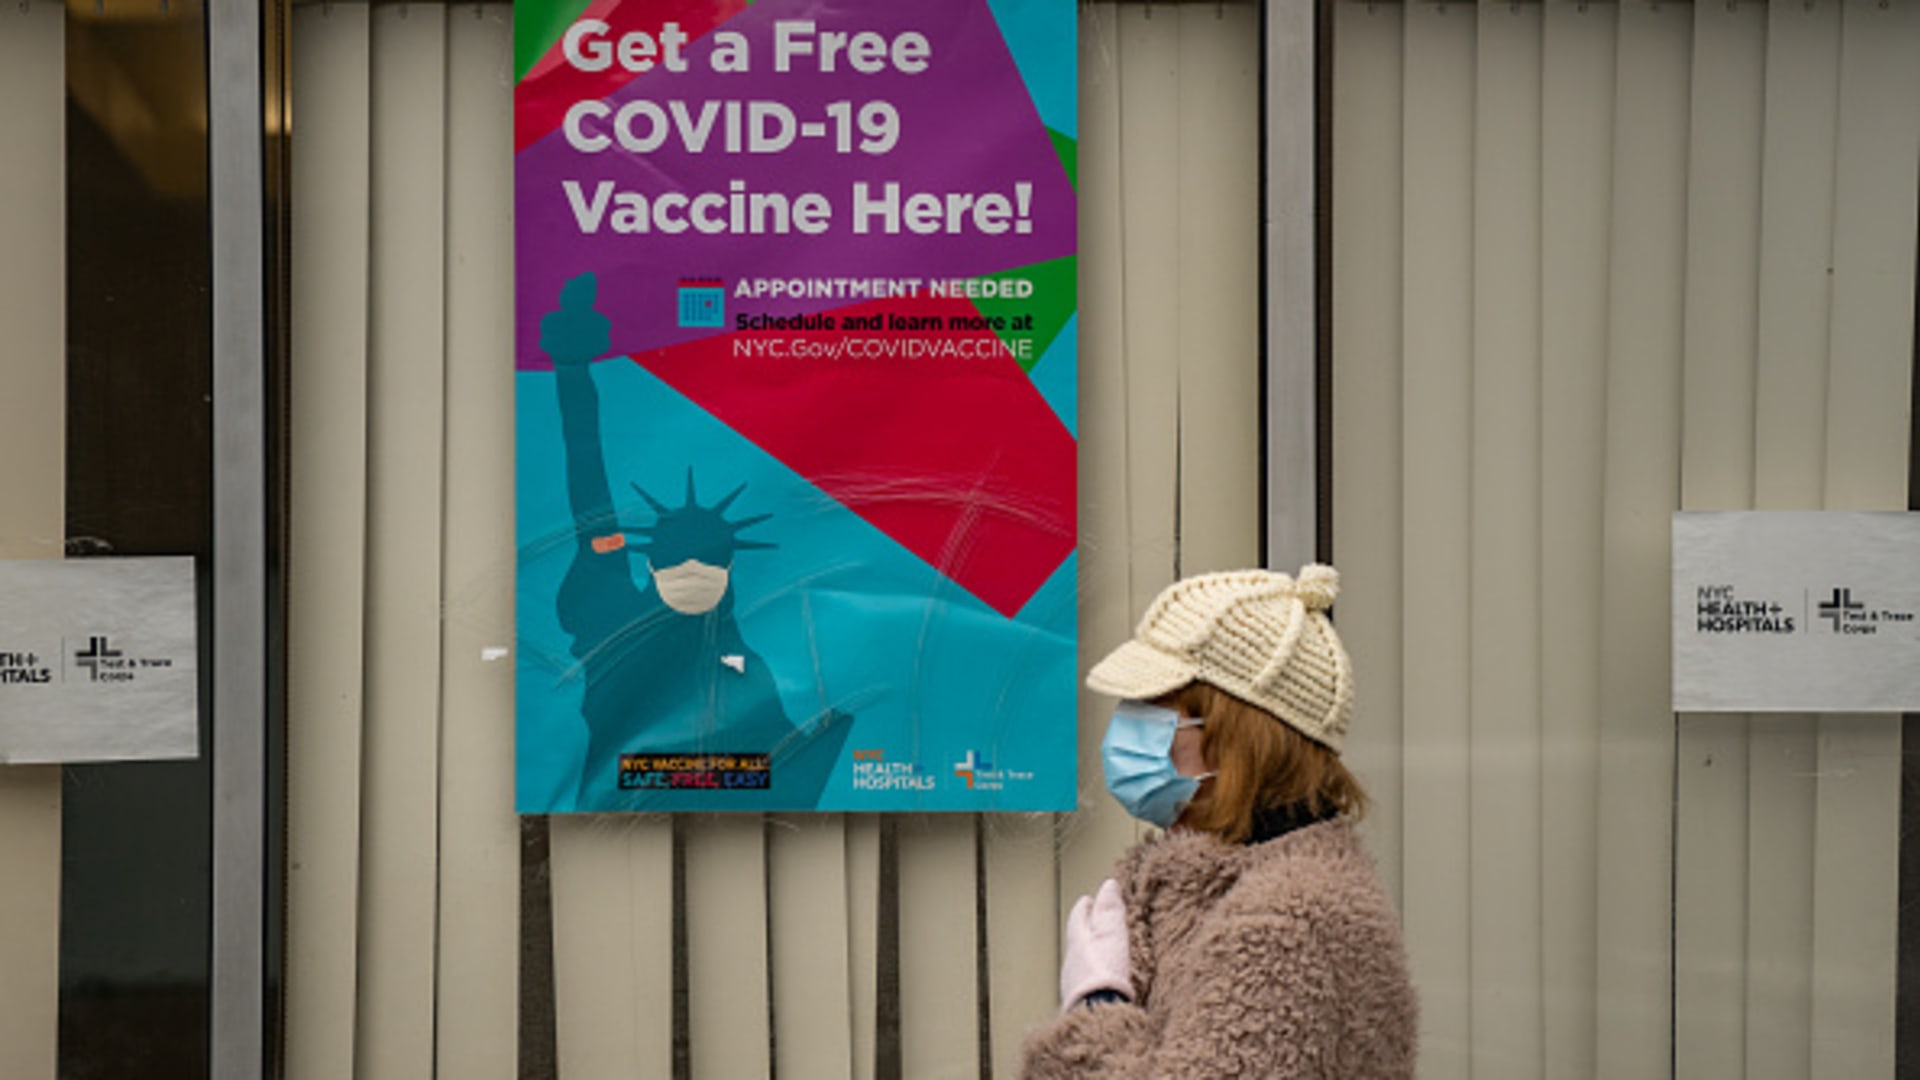 A person wearing a protective mask stands outside a Covid-19 vaccination site at Bathgate Industrial Park in the Bronx borough of New York, U.S., on Monday, Jan. 11, 2021.